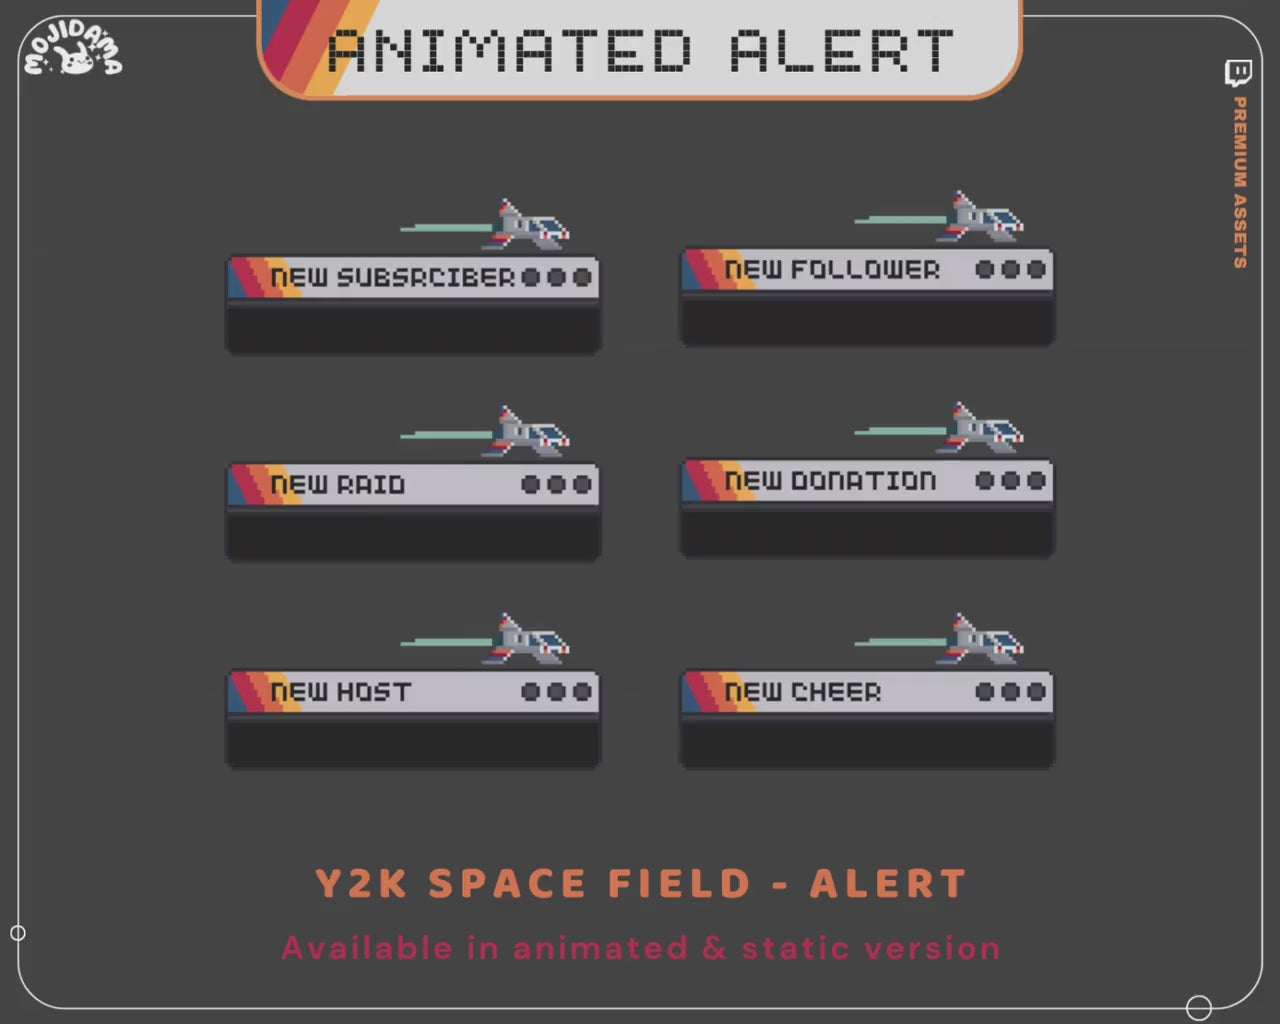 Twitch Stream Alert Animation Overlay Galaxy Space Animated Alerts Star Moon Cute Streaming Twitch Kick Youtube Vtubber Funny New Donation